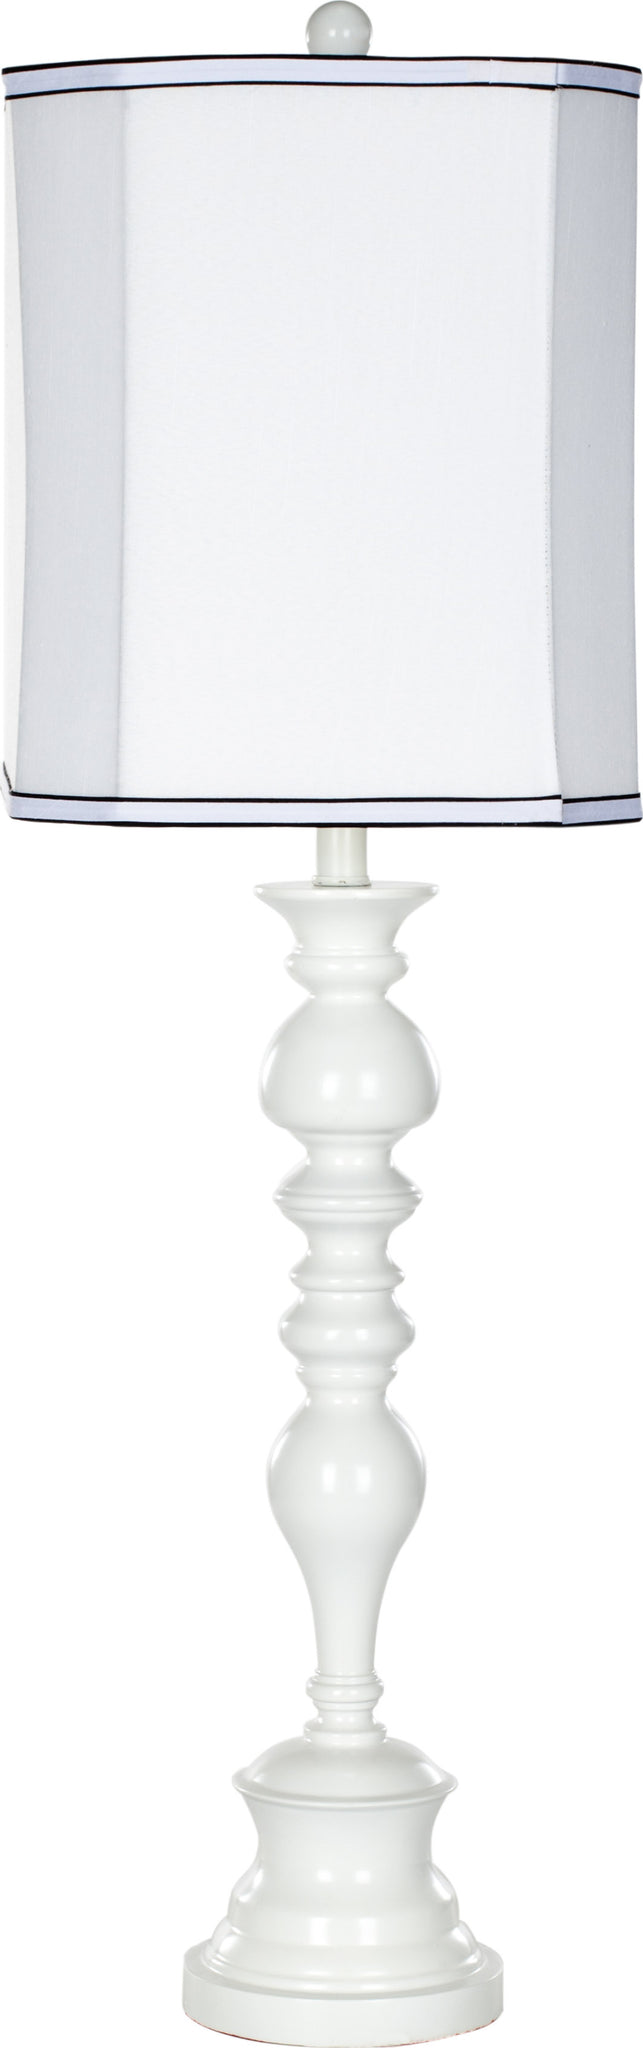 Safavieh Polly 36-Inch H Candlestick Lamp White main image